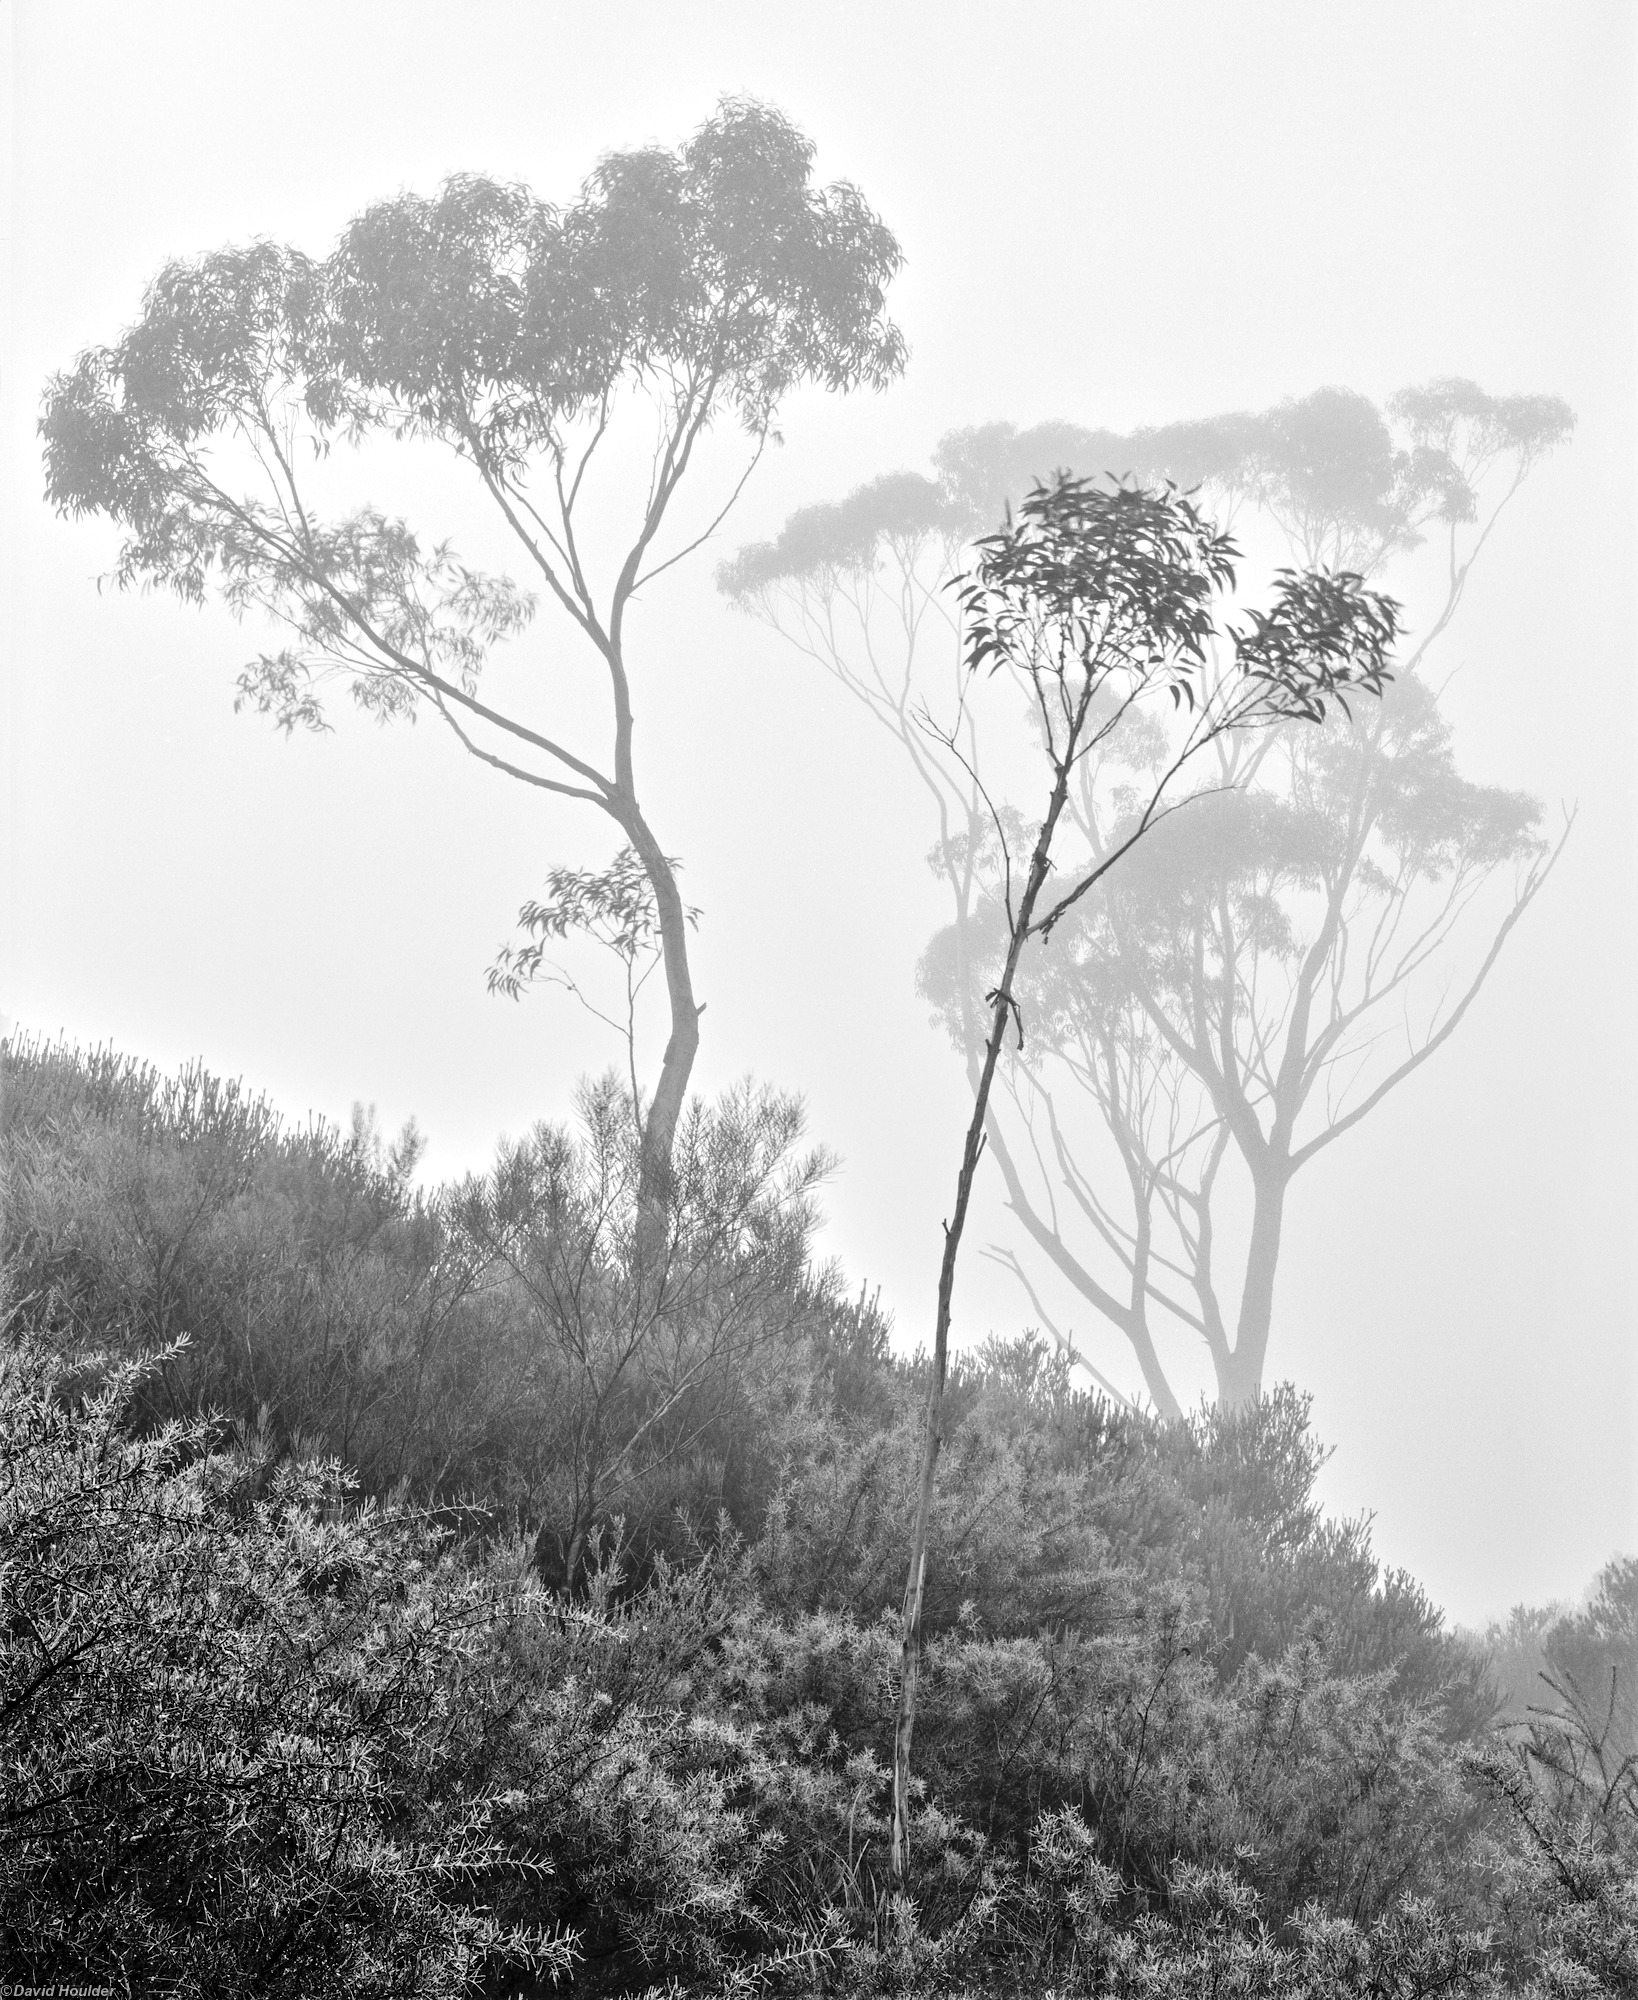 A eucalypt sapling with a small tree and a large tree in the fog behind.